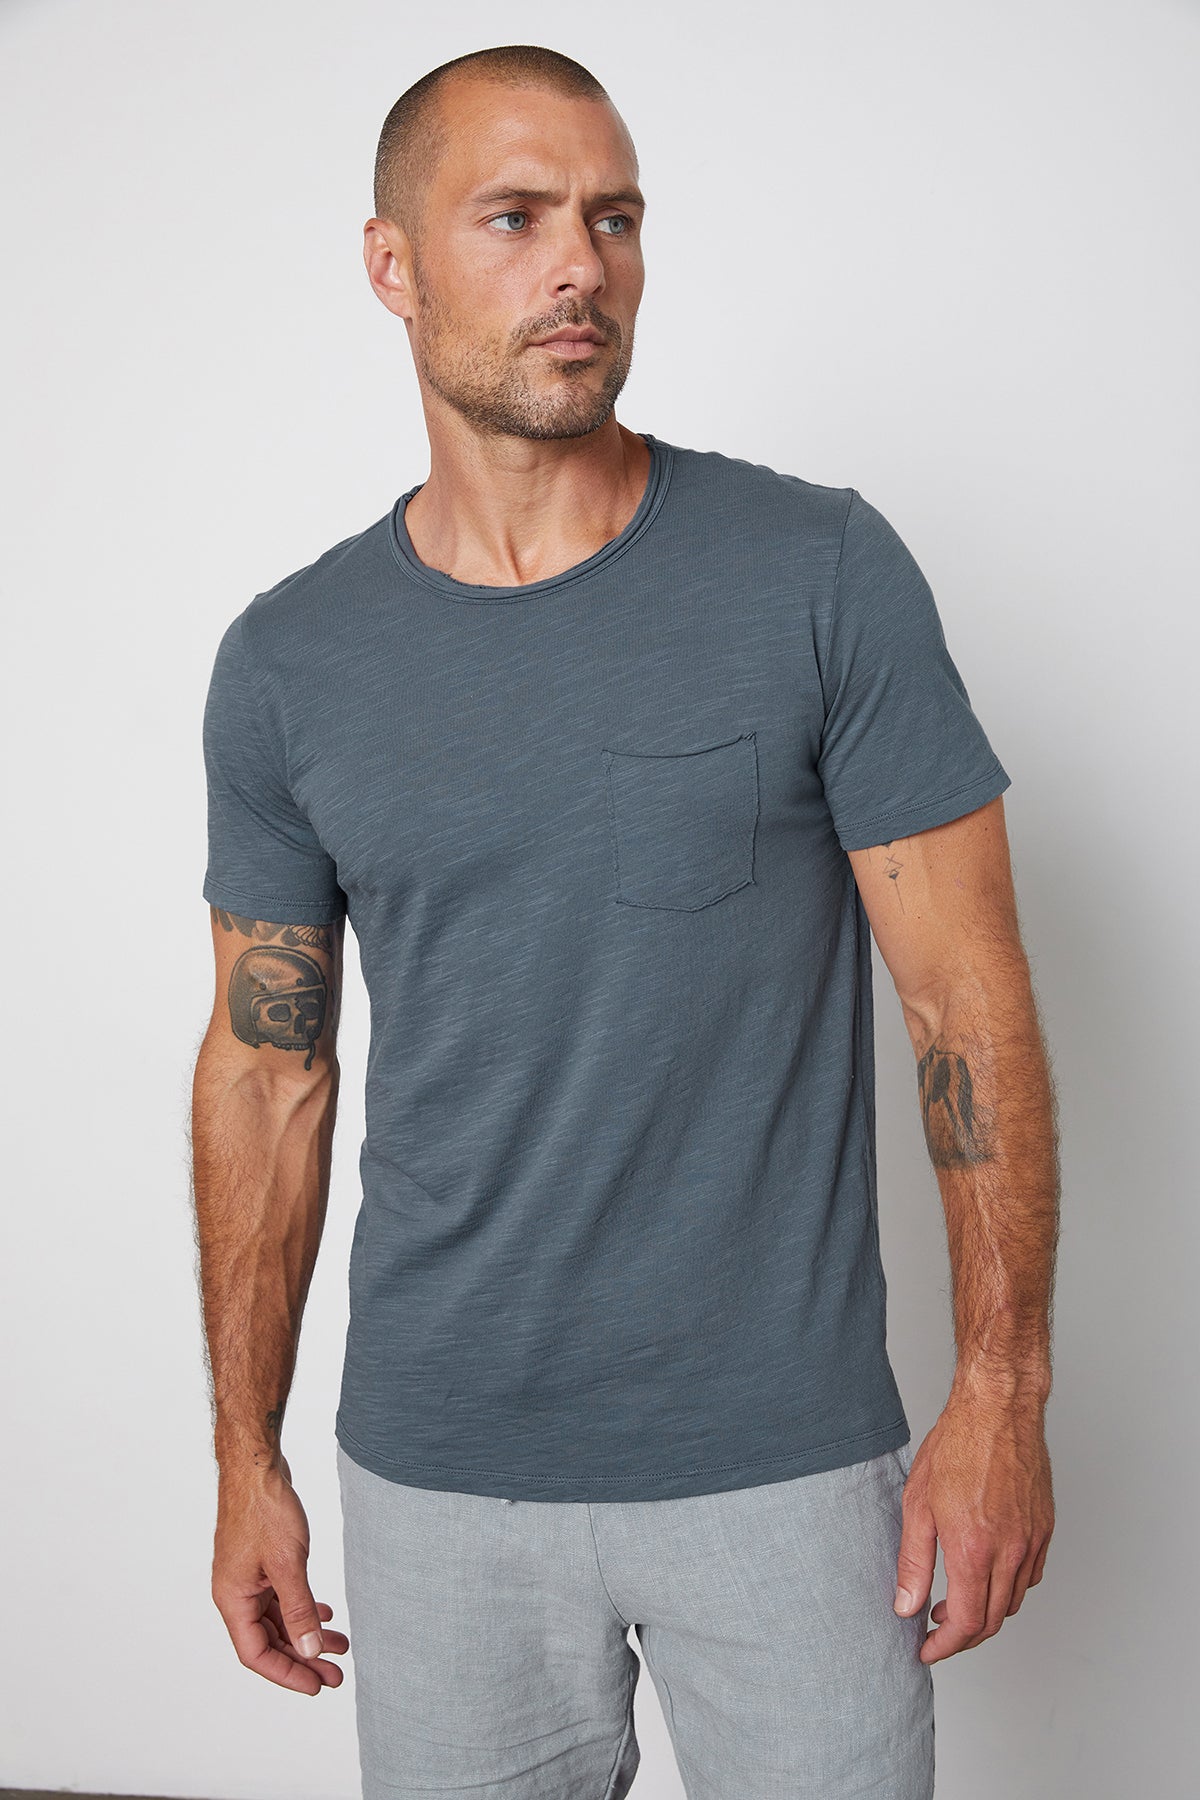 Chad slub cotton tee with raw edges and front pocket in malachite, with Jonathan shorts in chambray.-25328431530177